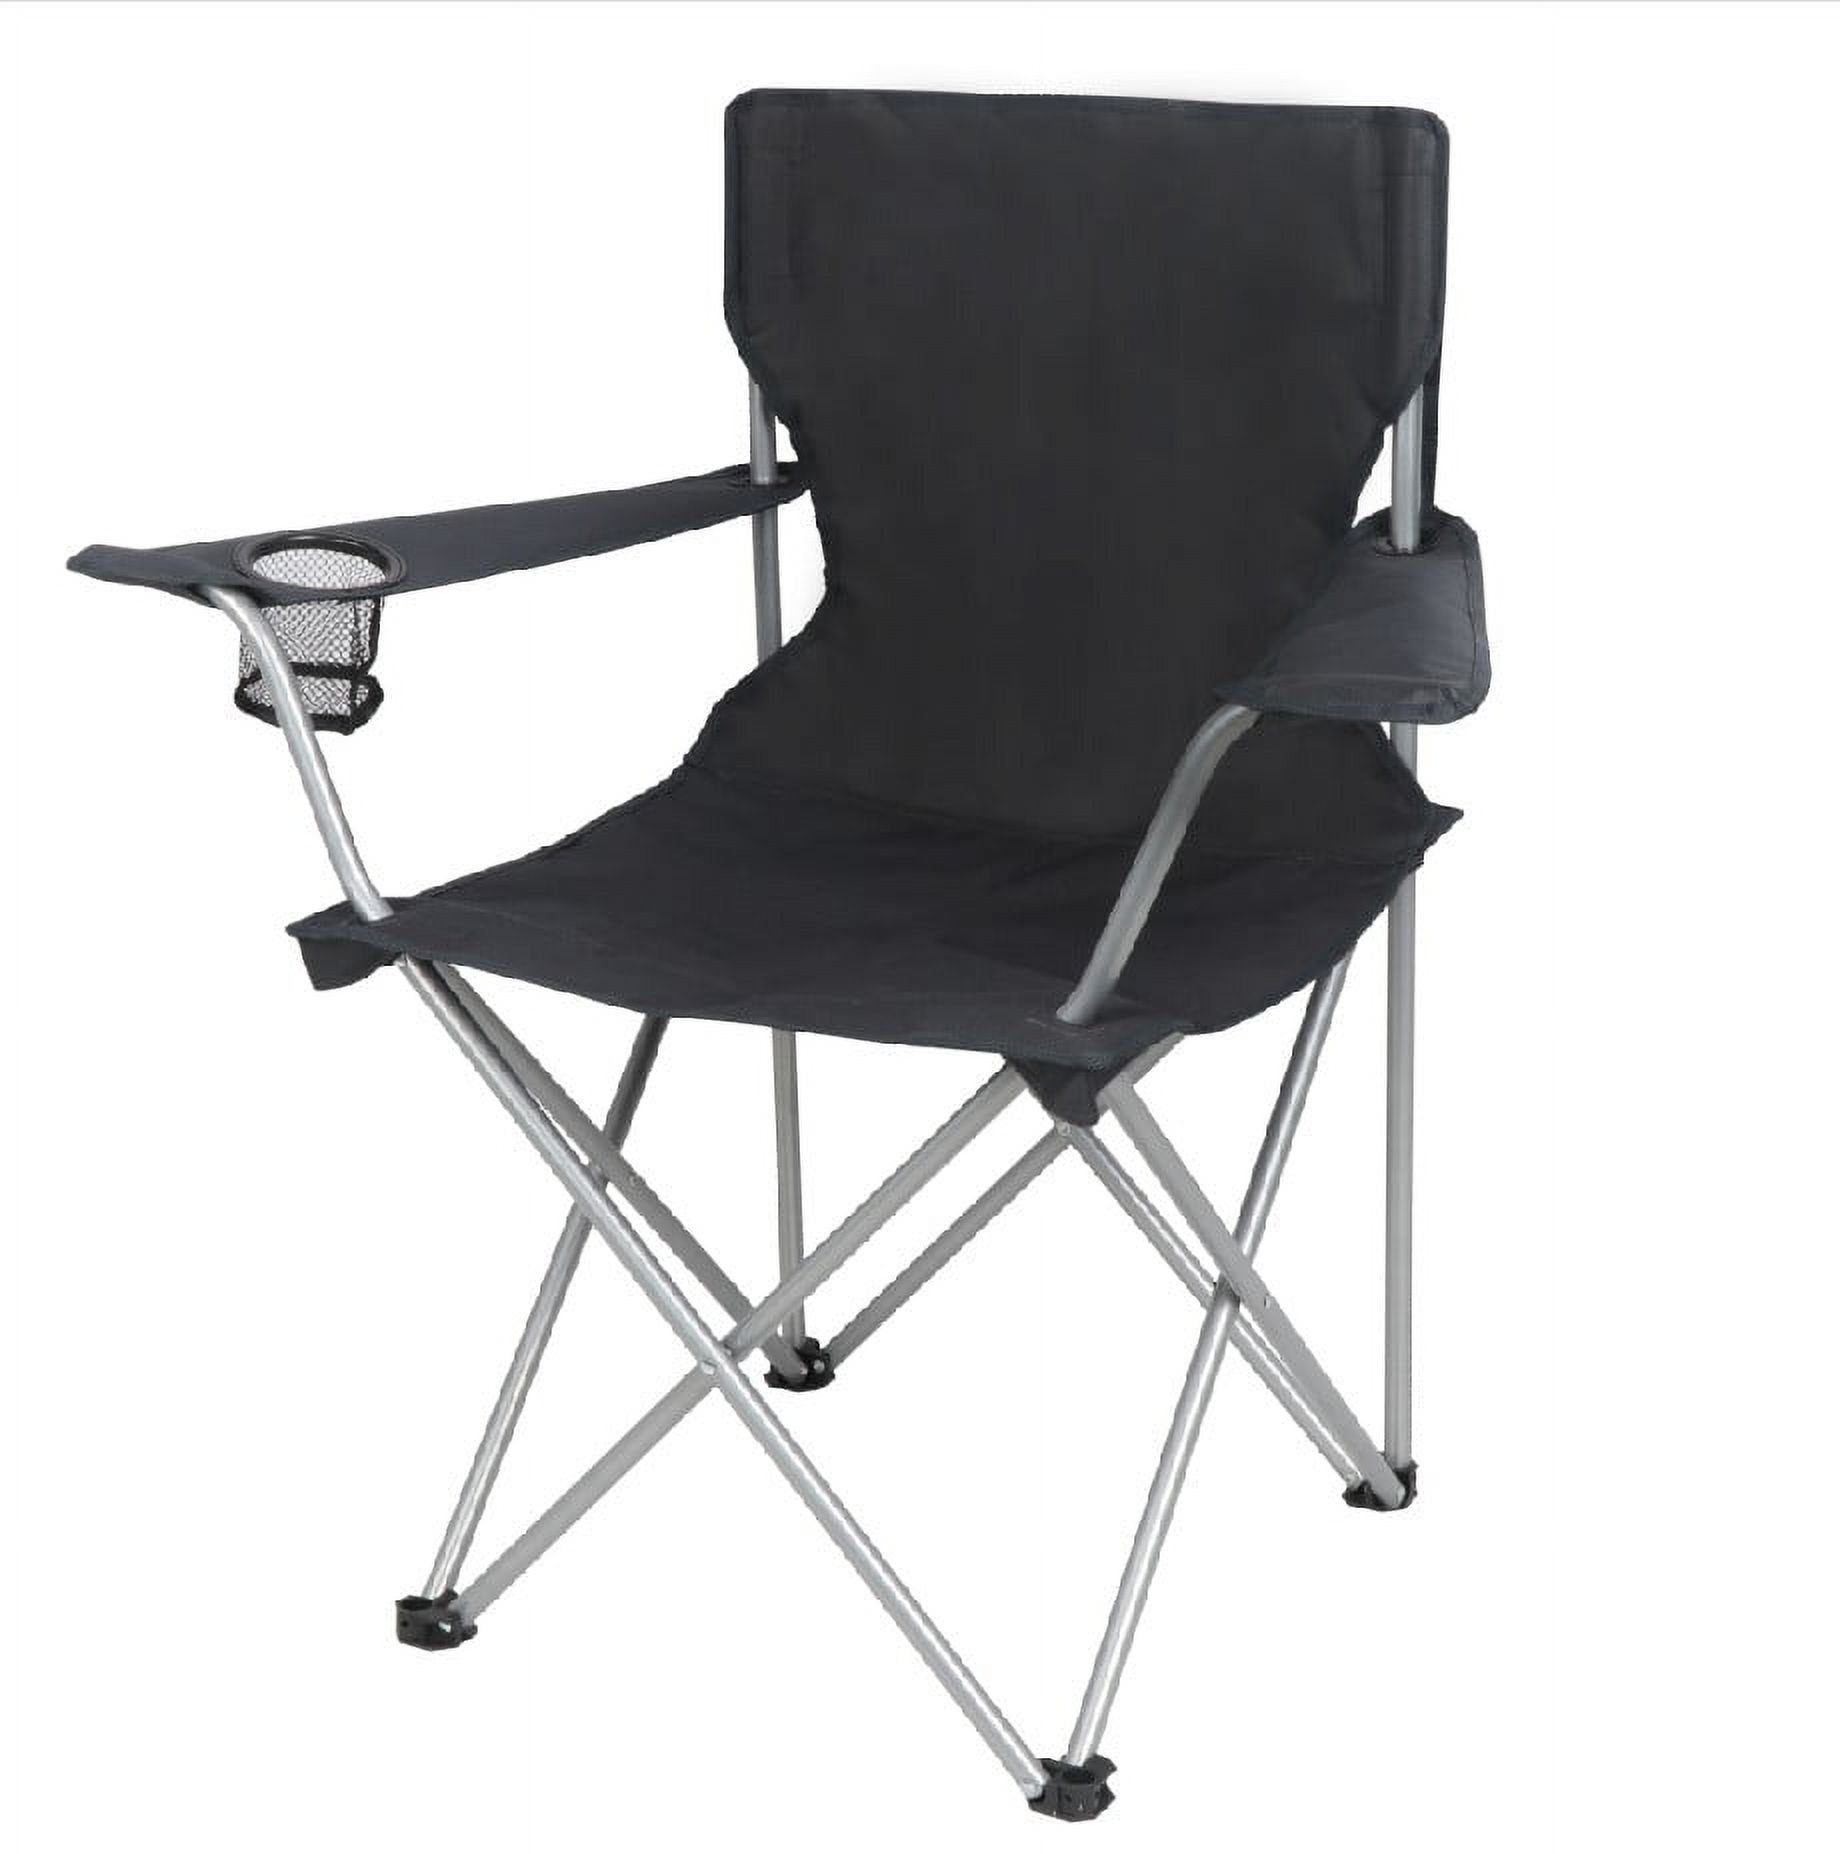 Ozark Trail Adult Basic Quad Folding Camp Chair with Cup Holder, Black - image 1 of 13